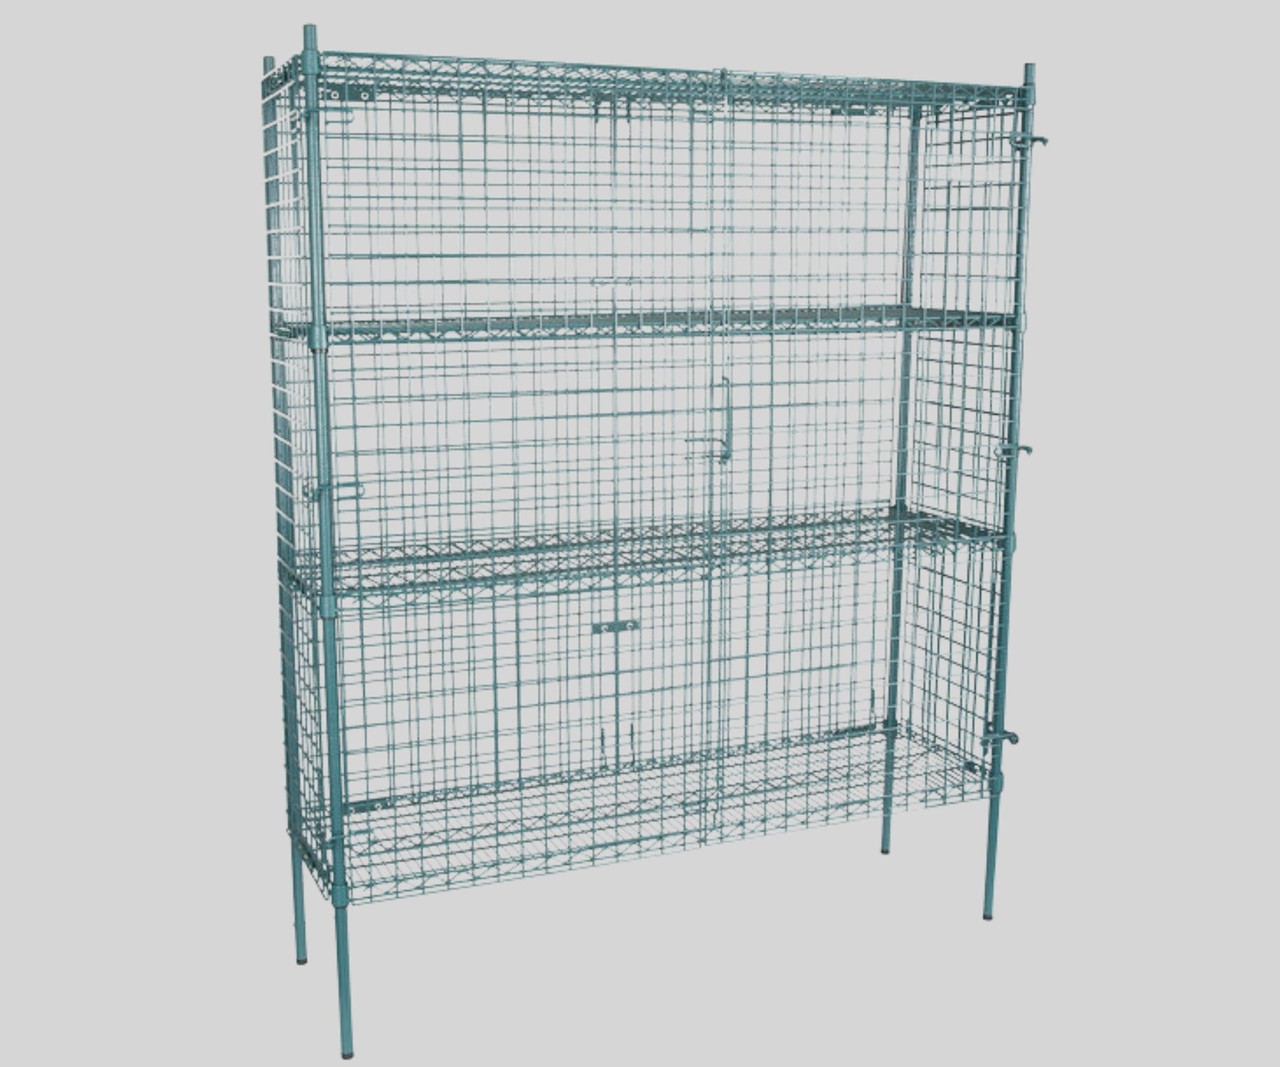 Chicken Pieces CP NSF Stationary Green Wire Security Cage Kit - 18" x 60" x 74" | Secure & Stable Storage Solution